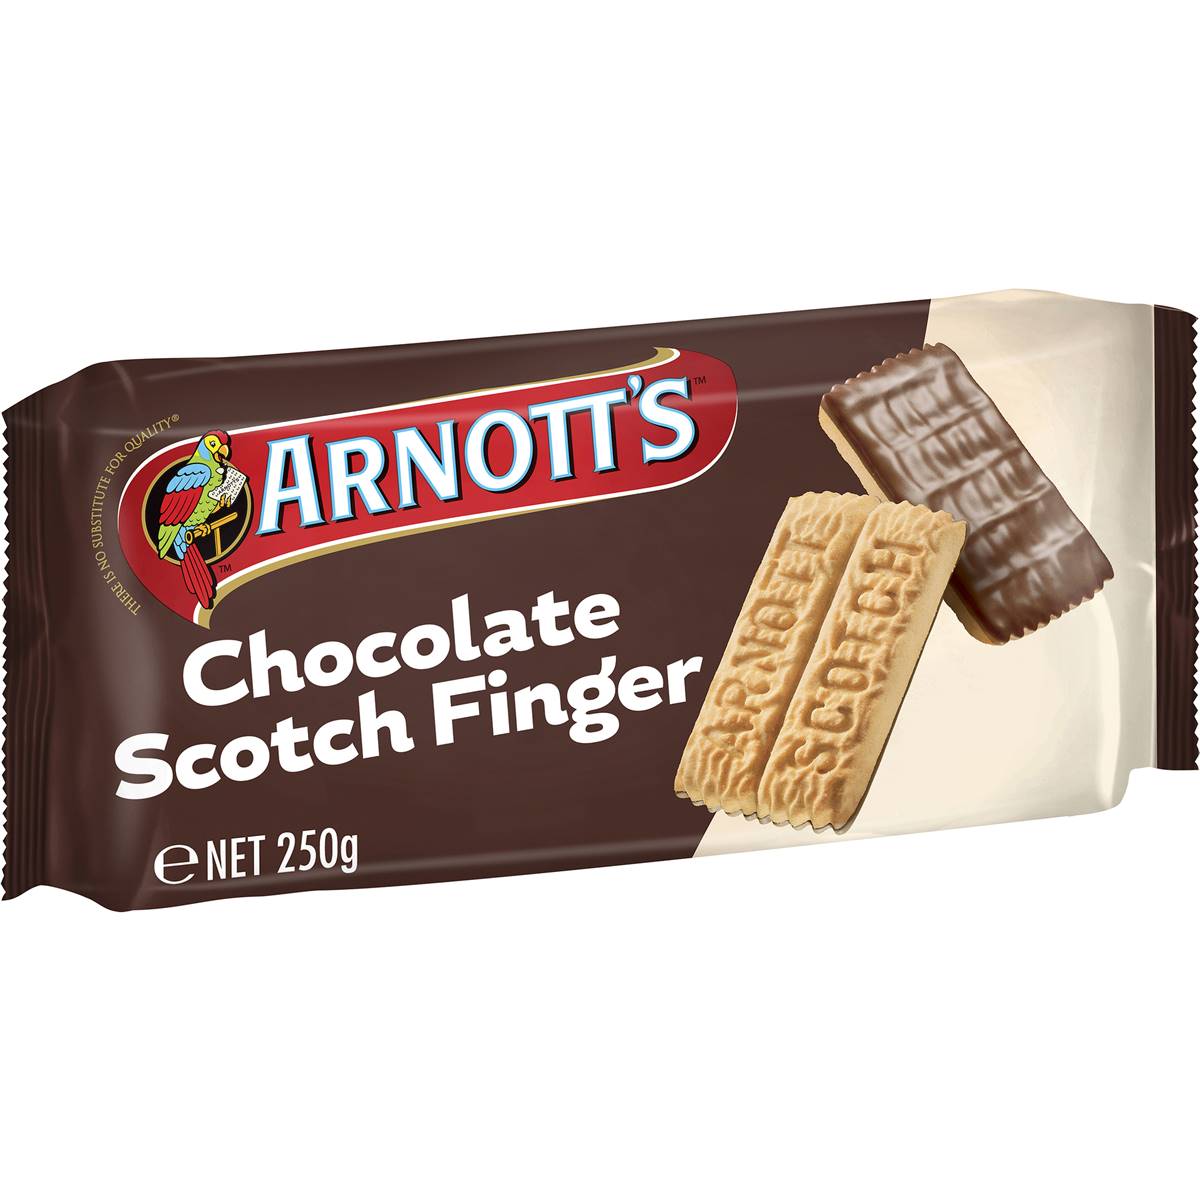 Calories In Arnotts Chocolate Scotch Finger Biscuits Calcount 6618